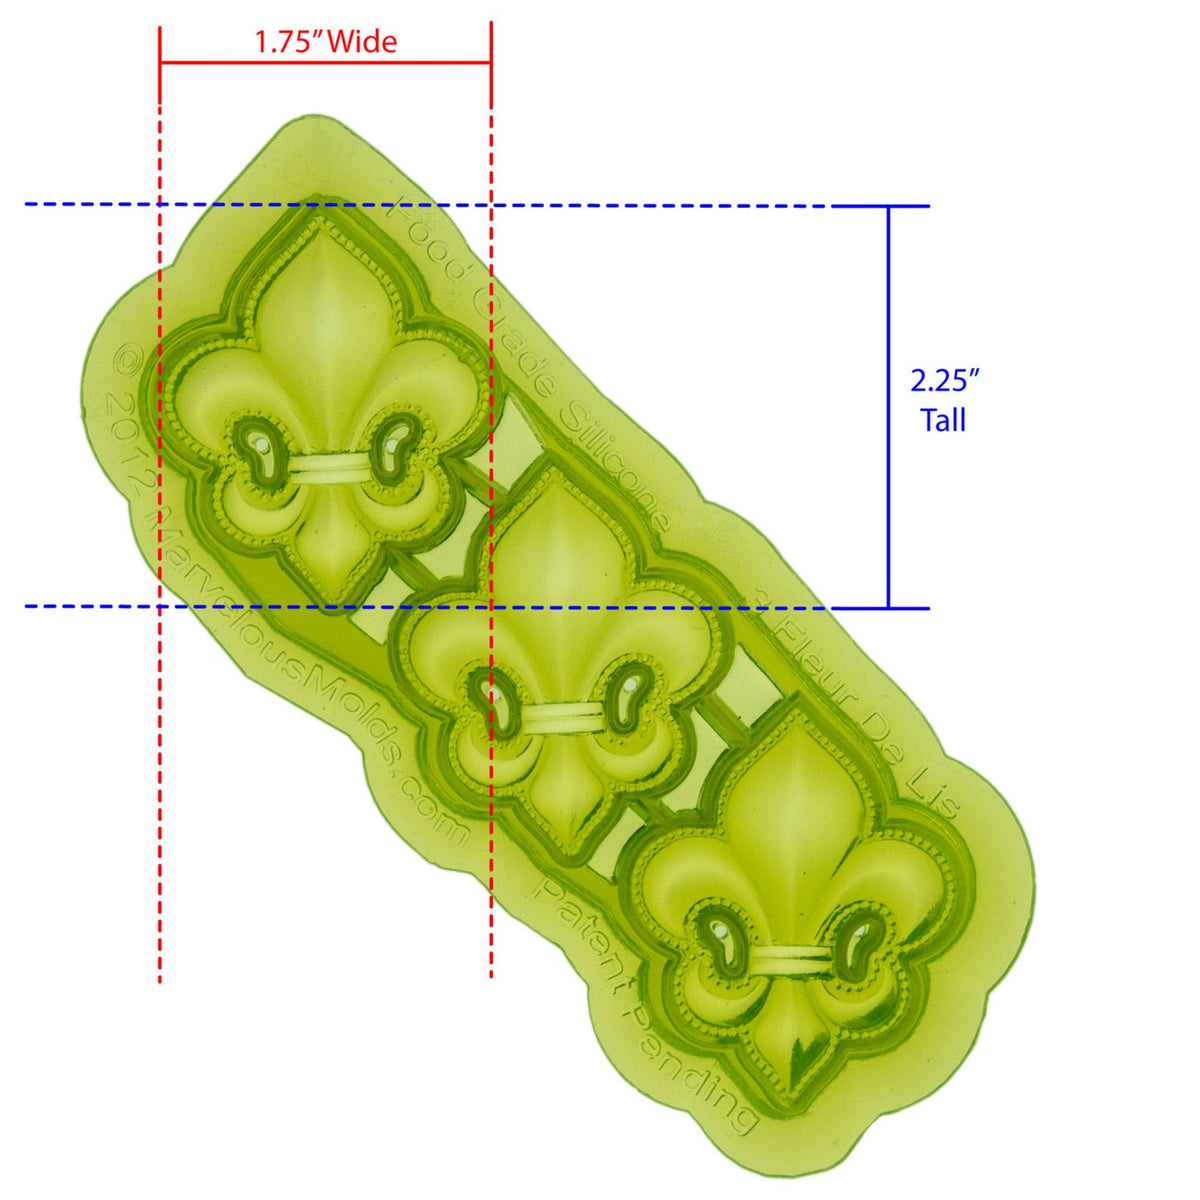 3 Fleur De Lis Silicone Mold Cavity Measures 1.75 inches Wide by 2.25 inches Tall, proudly Made in USA